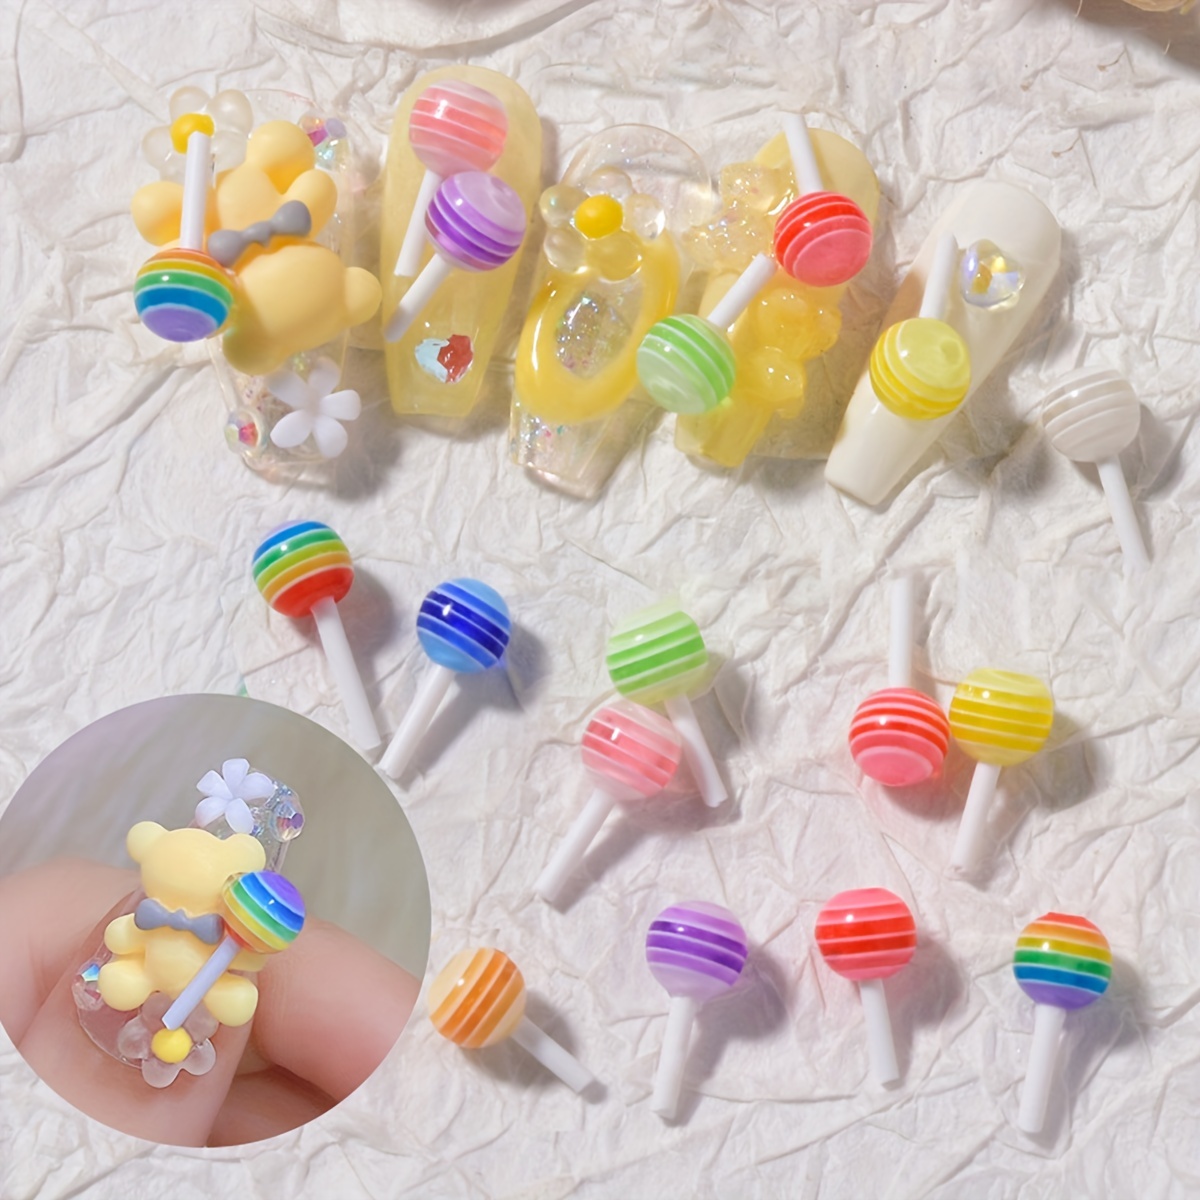 30pcs Resin Nail Charms 3d Cute Bear Lollipop Candy Jewelry For